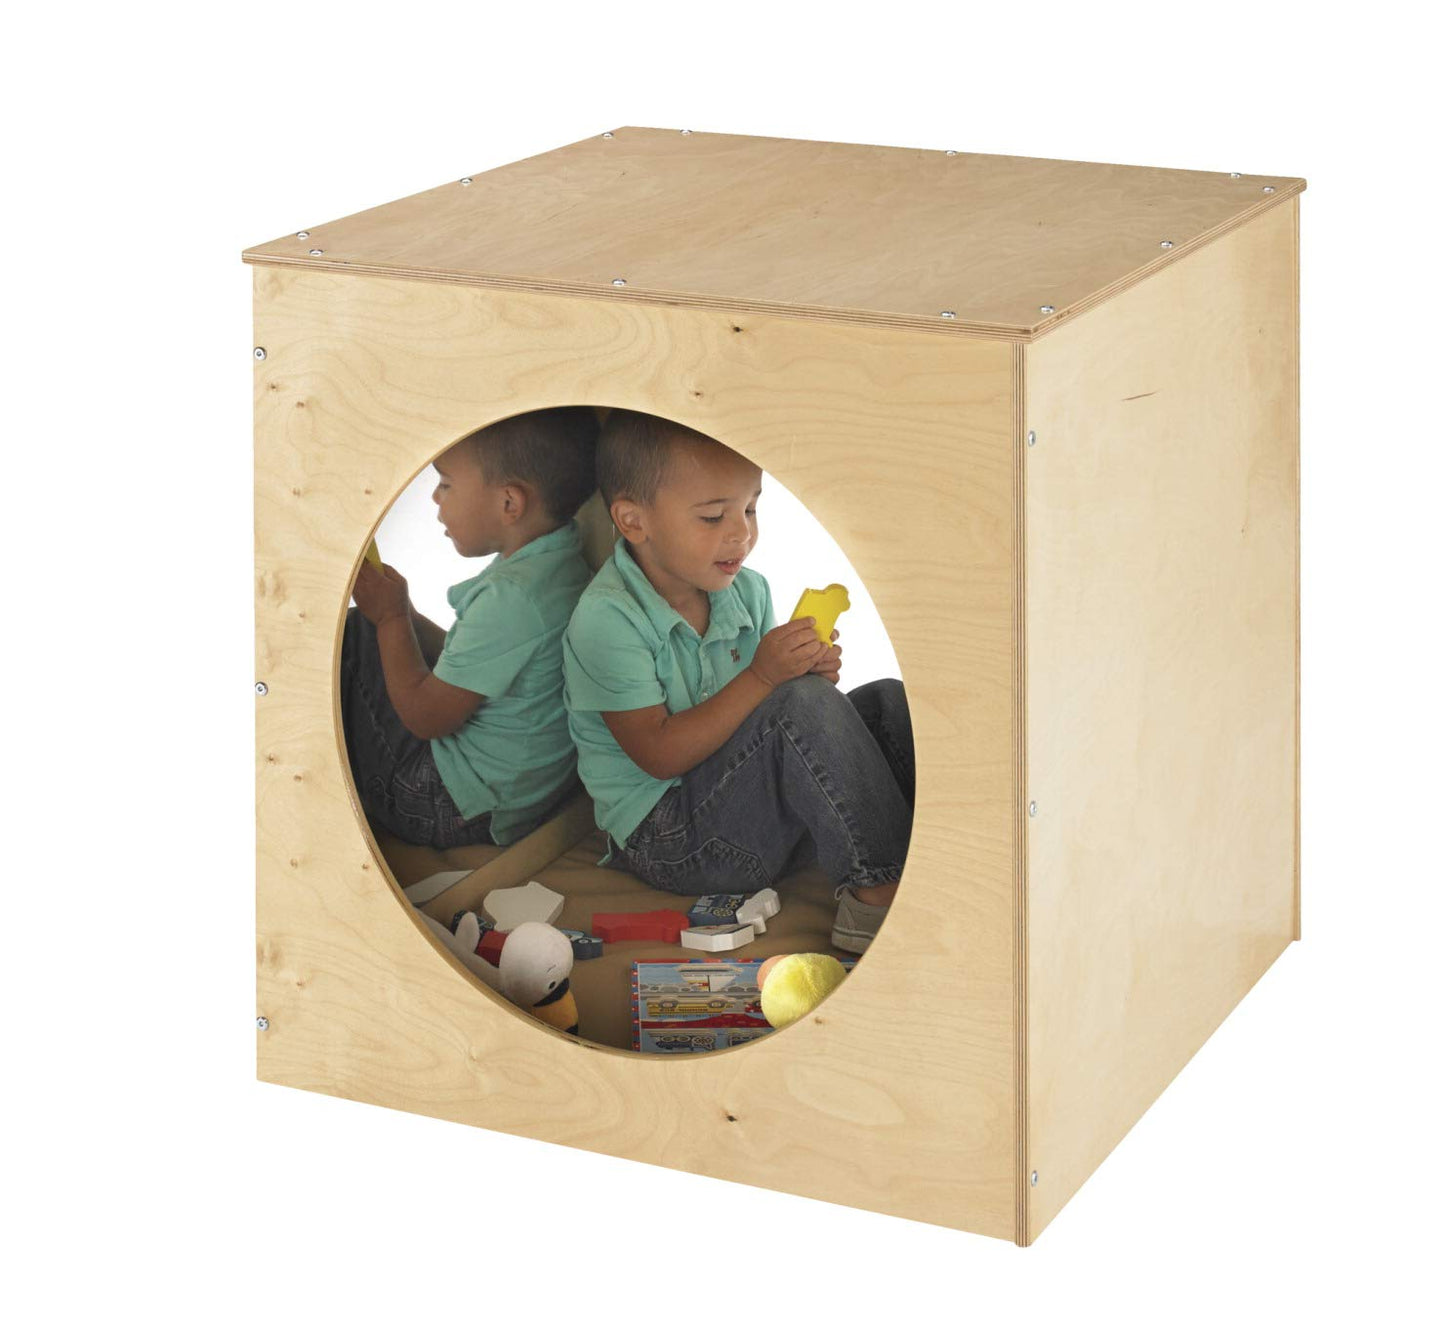 1491056 Reflection Cozy Cube, 30 X 30 Inches Height,30 Inches Width,30 Inches Length,Natural Wood